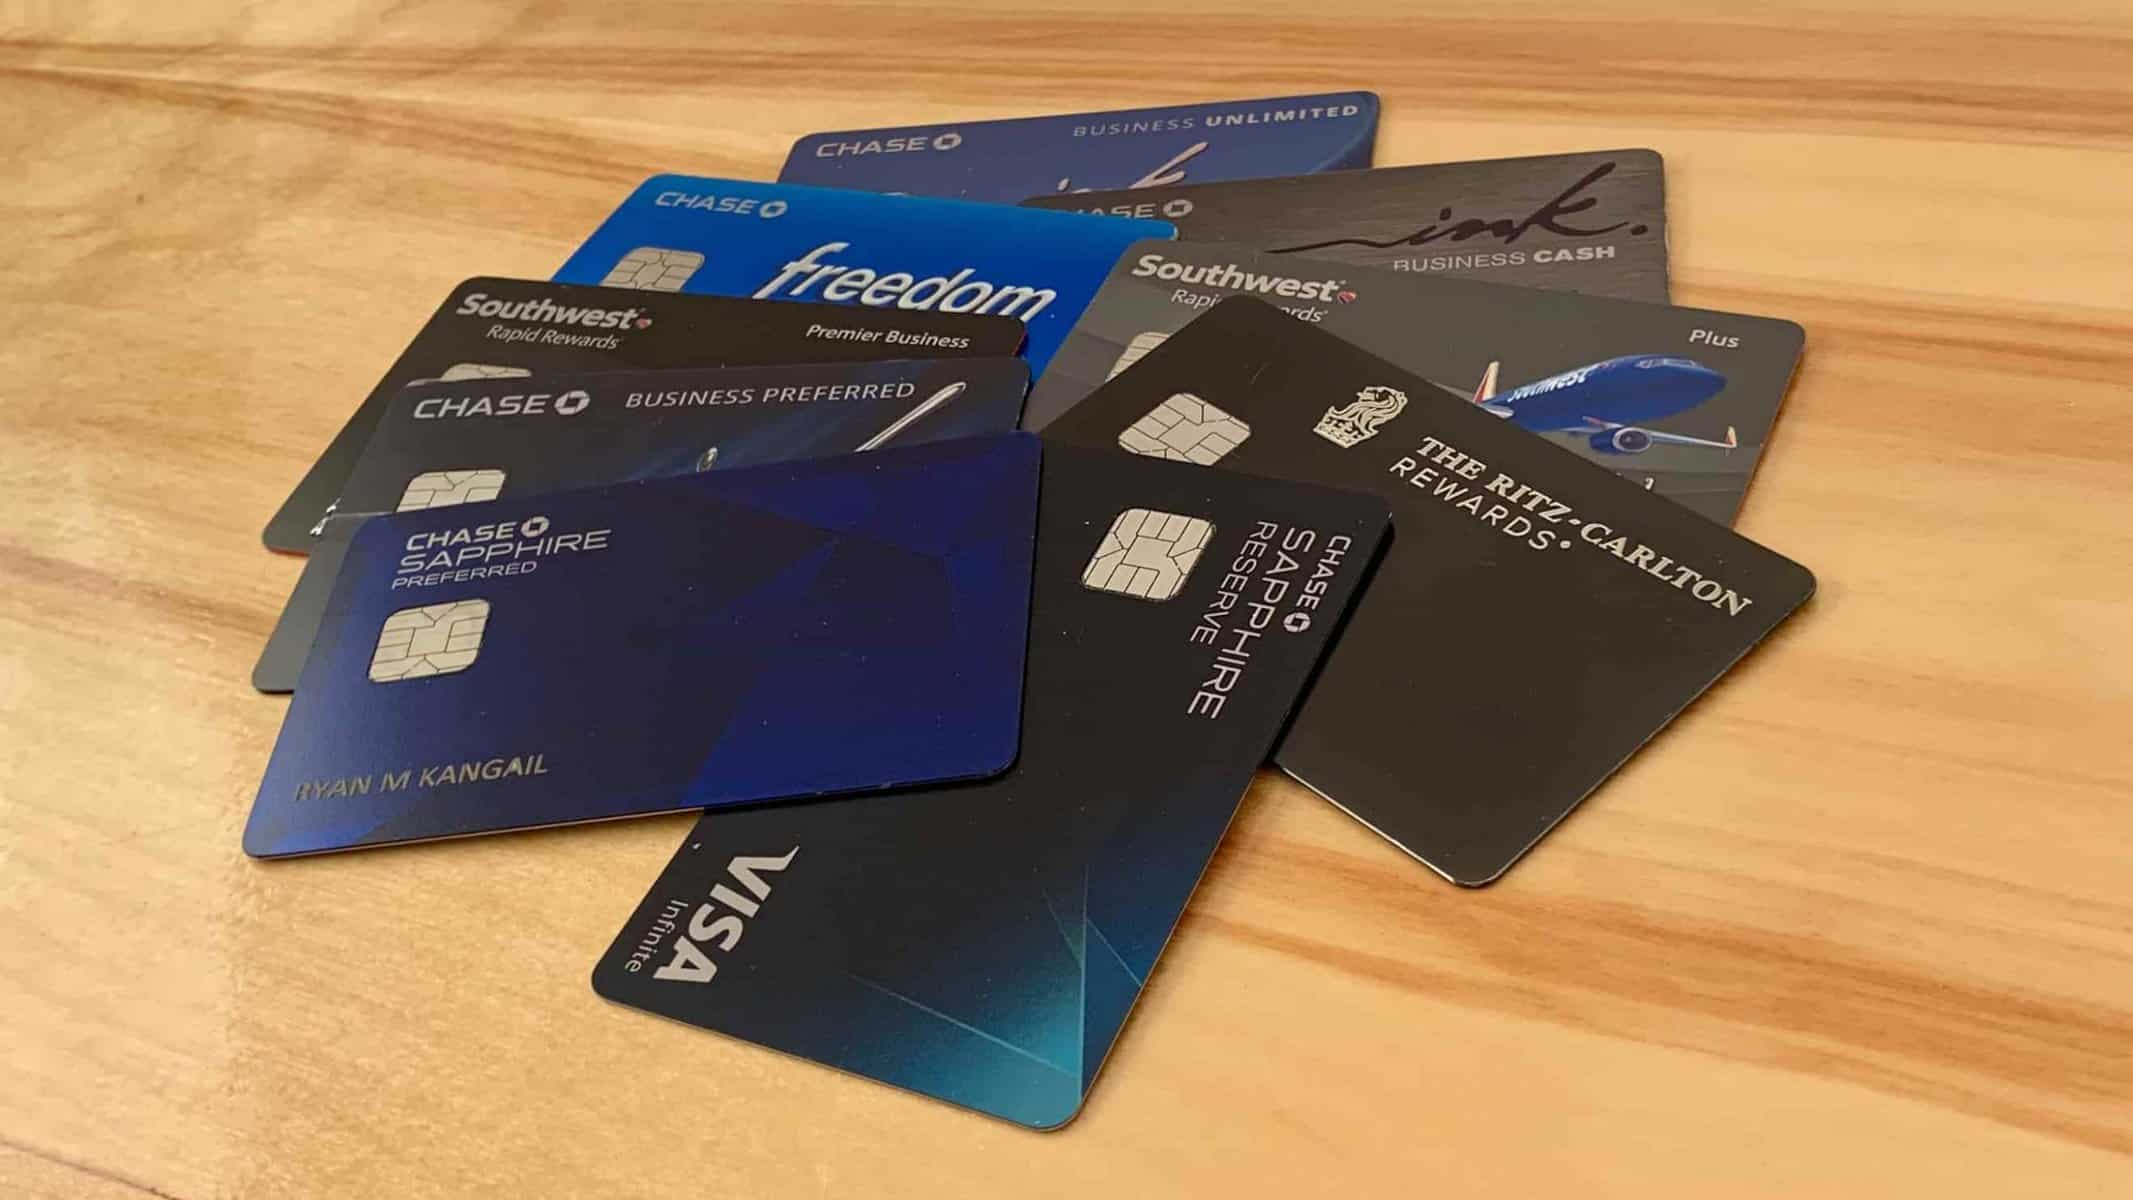 chase credit card application status